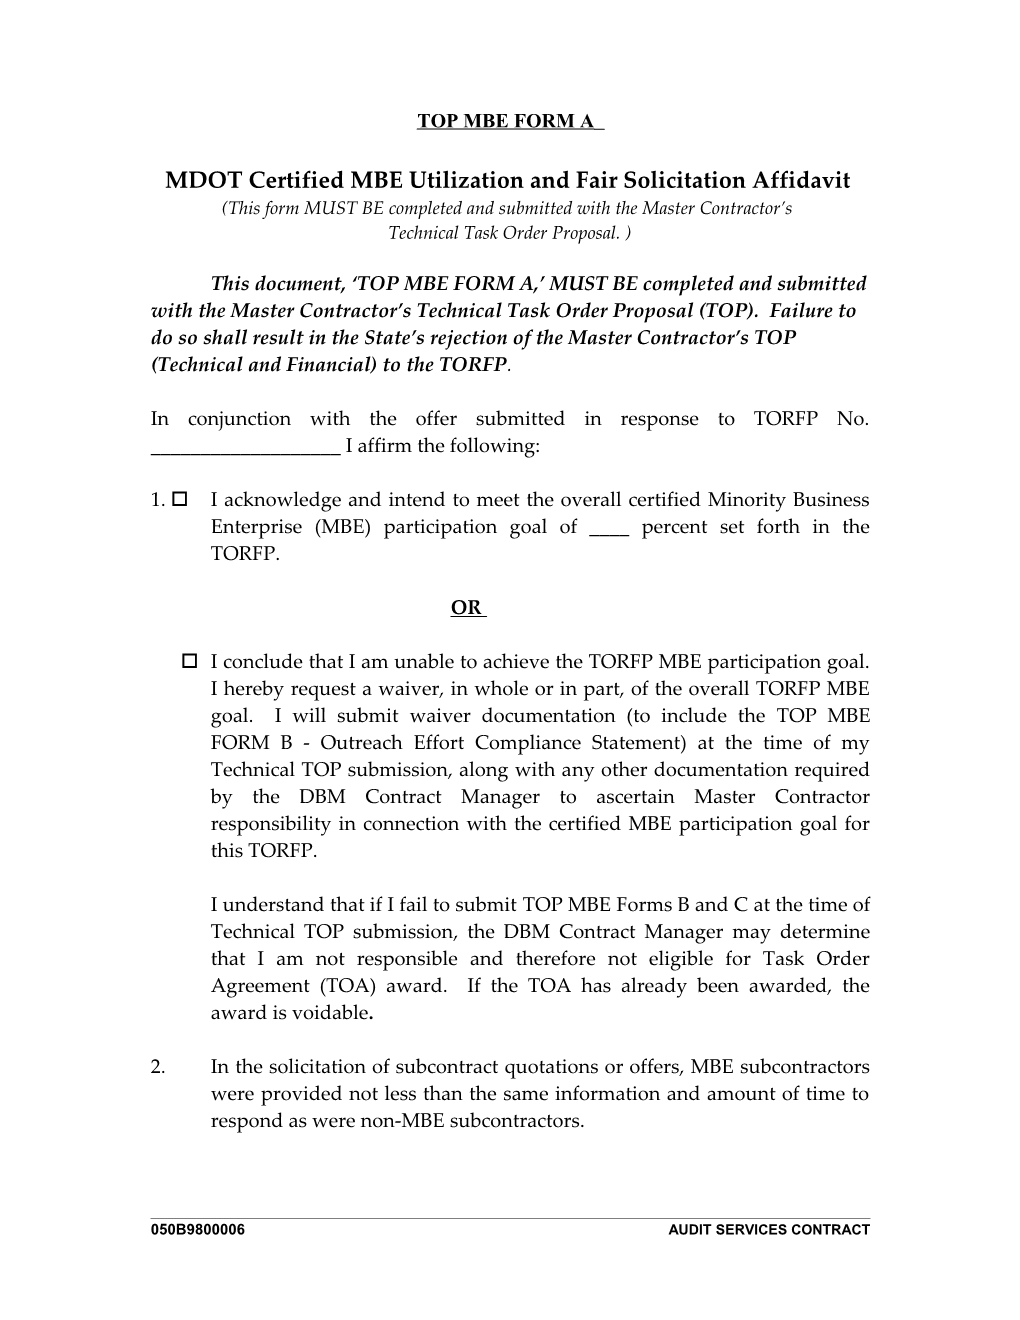 Audit Services Contract, TOP MBE Forms A-B-C